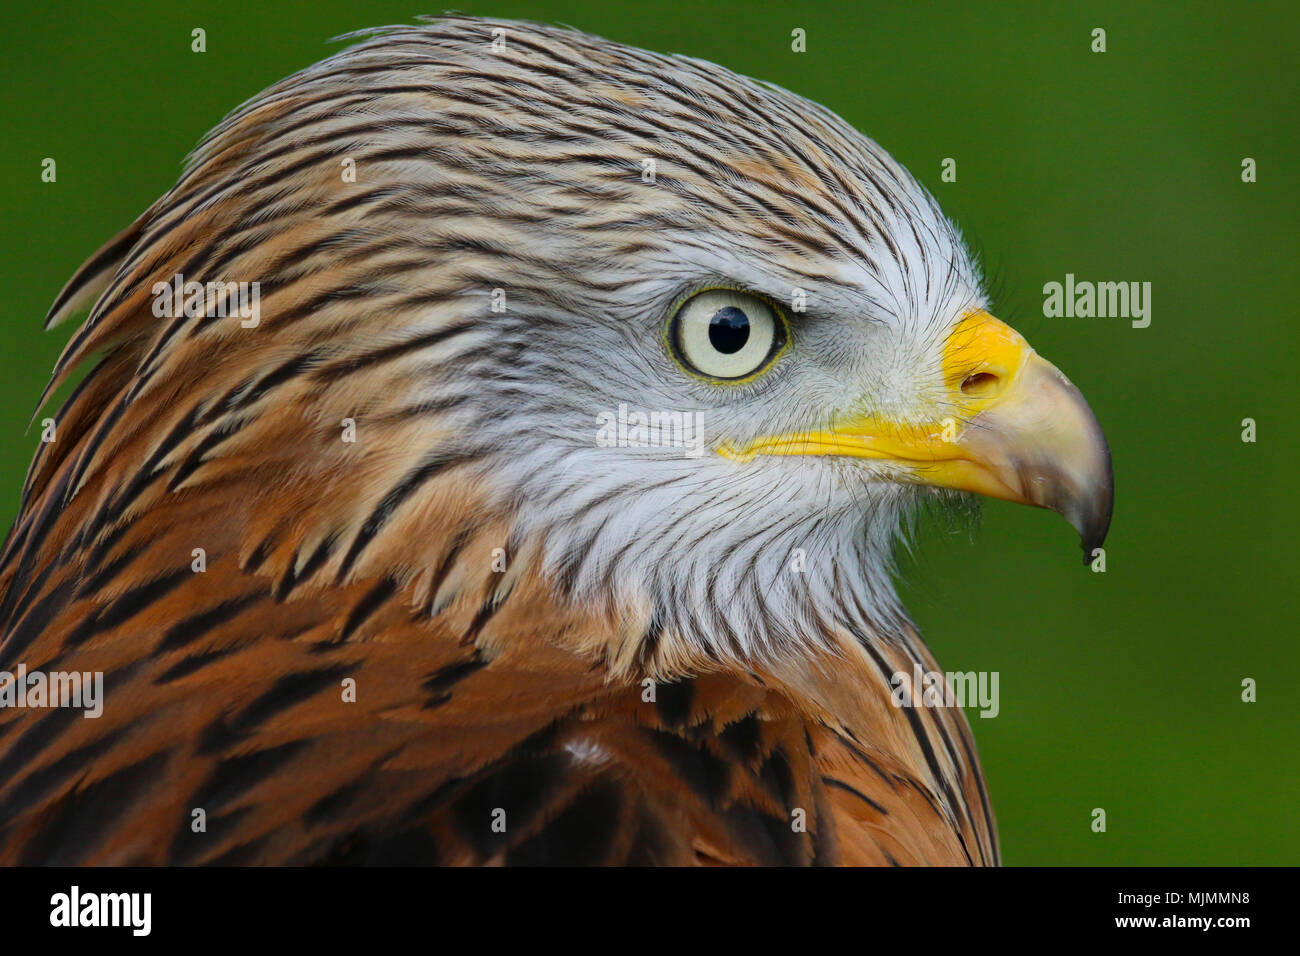 Head and shoulders portrait of a Red Kite (Milvus milvus) bird of prey in the UK countryside Stock Photo